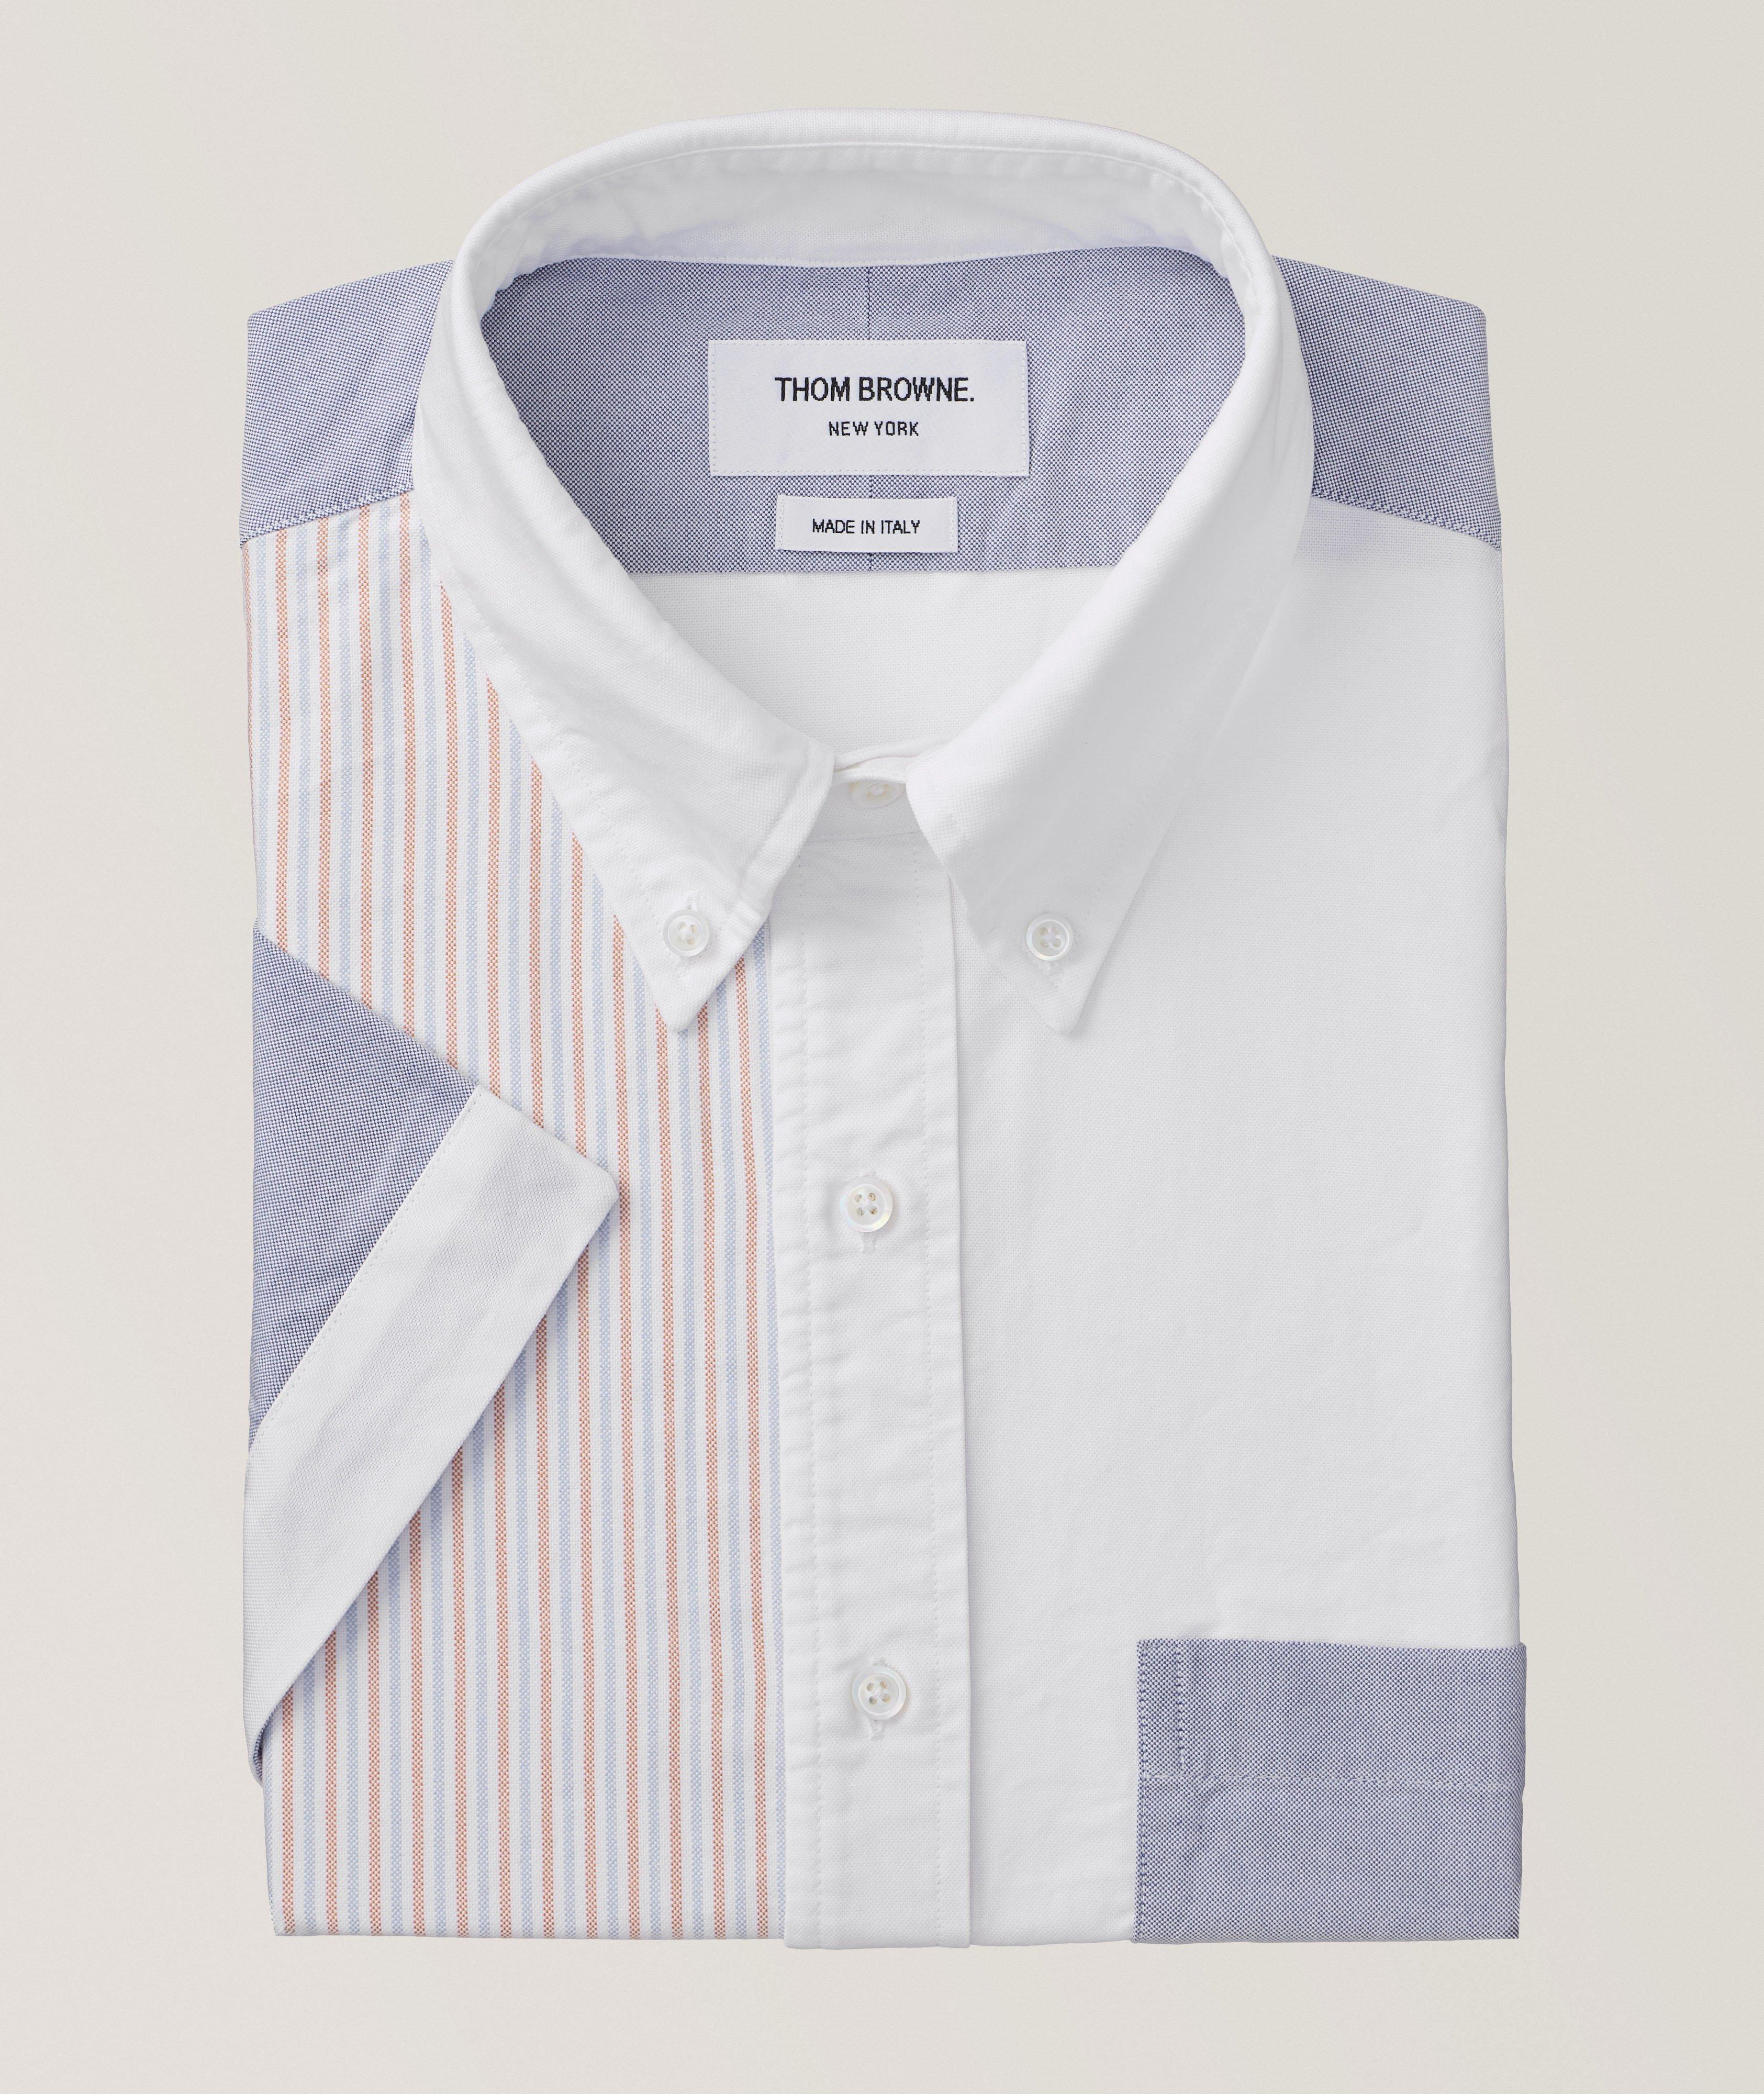 Thom Browne Contrast Panel Cotton Oxford Shirt